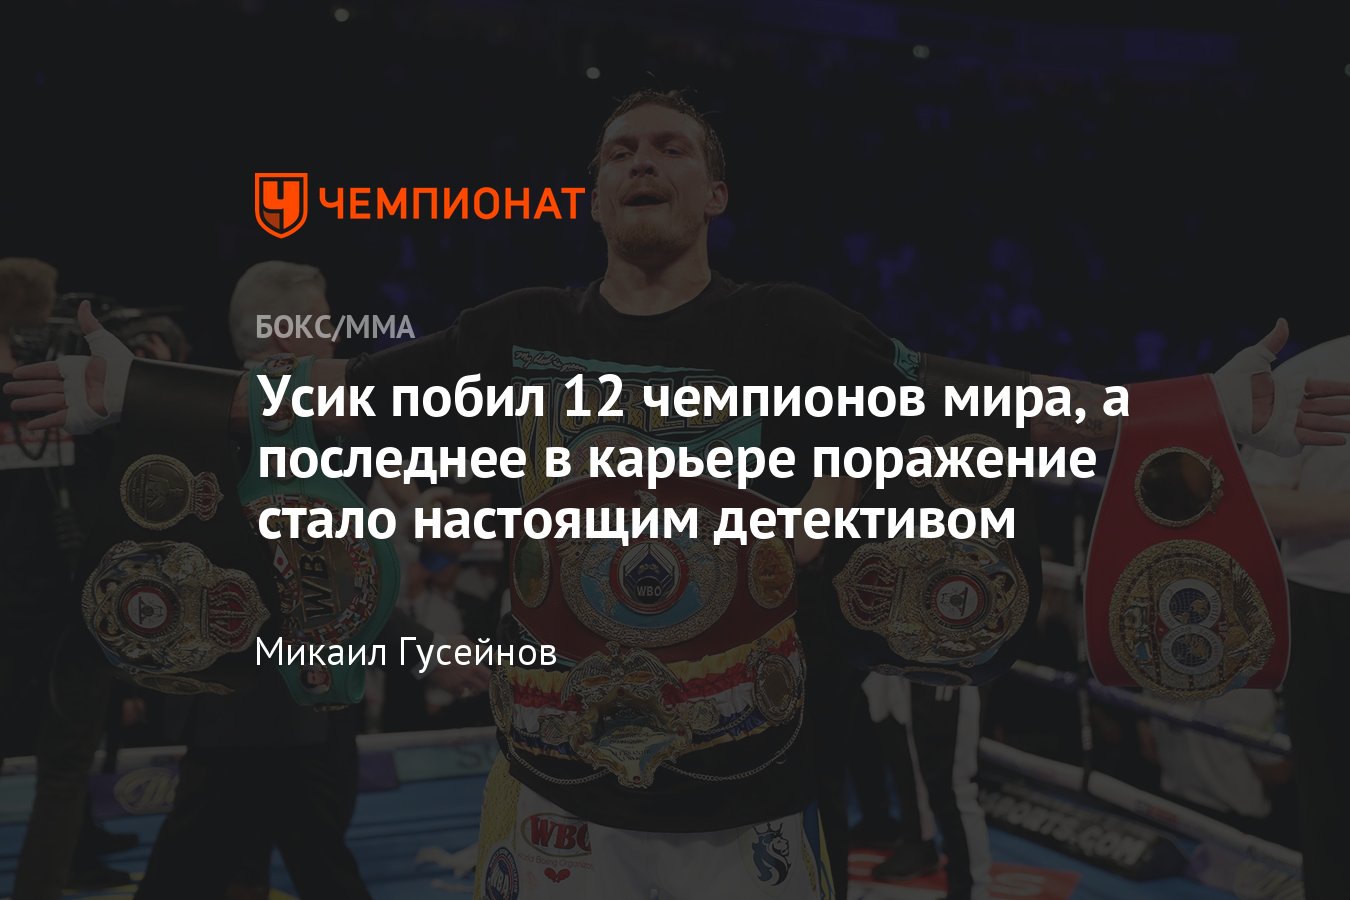 The history of the amateur and professional career of Oleksandr Usyk thumbnail